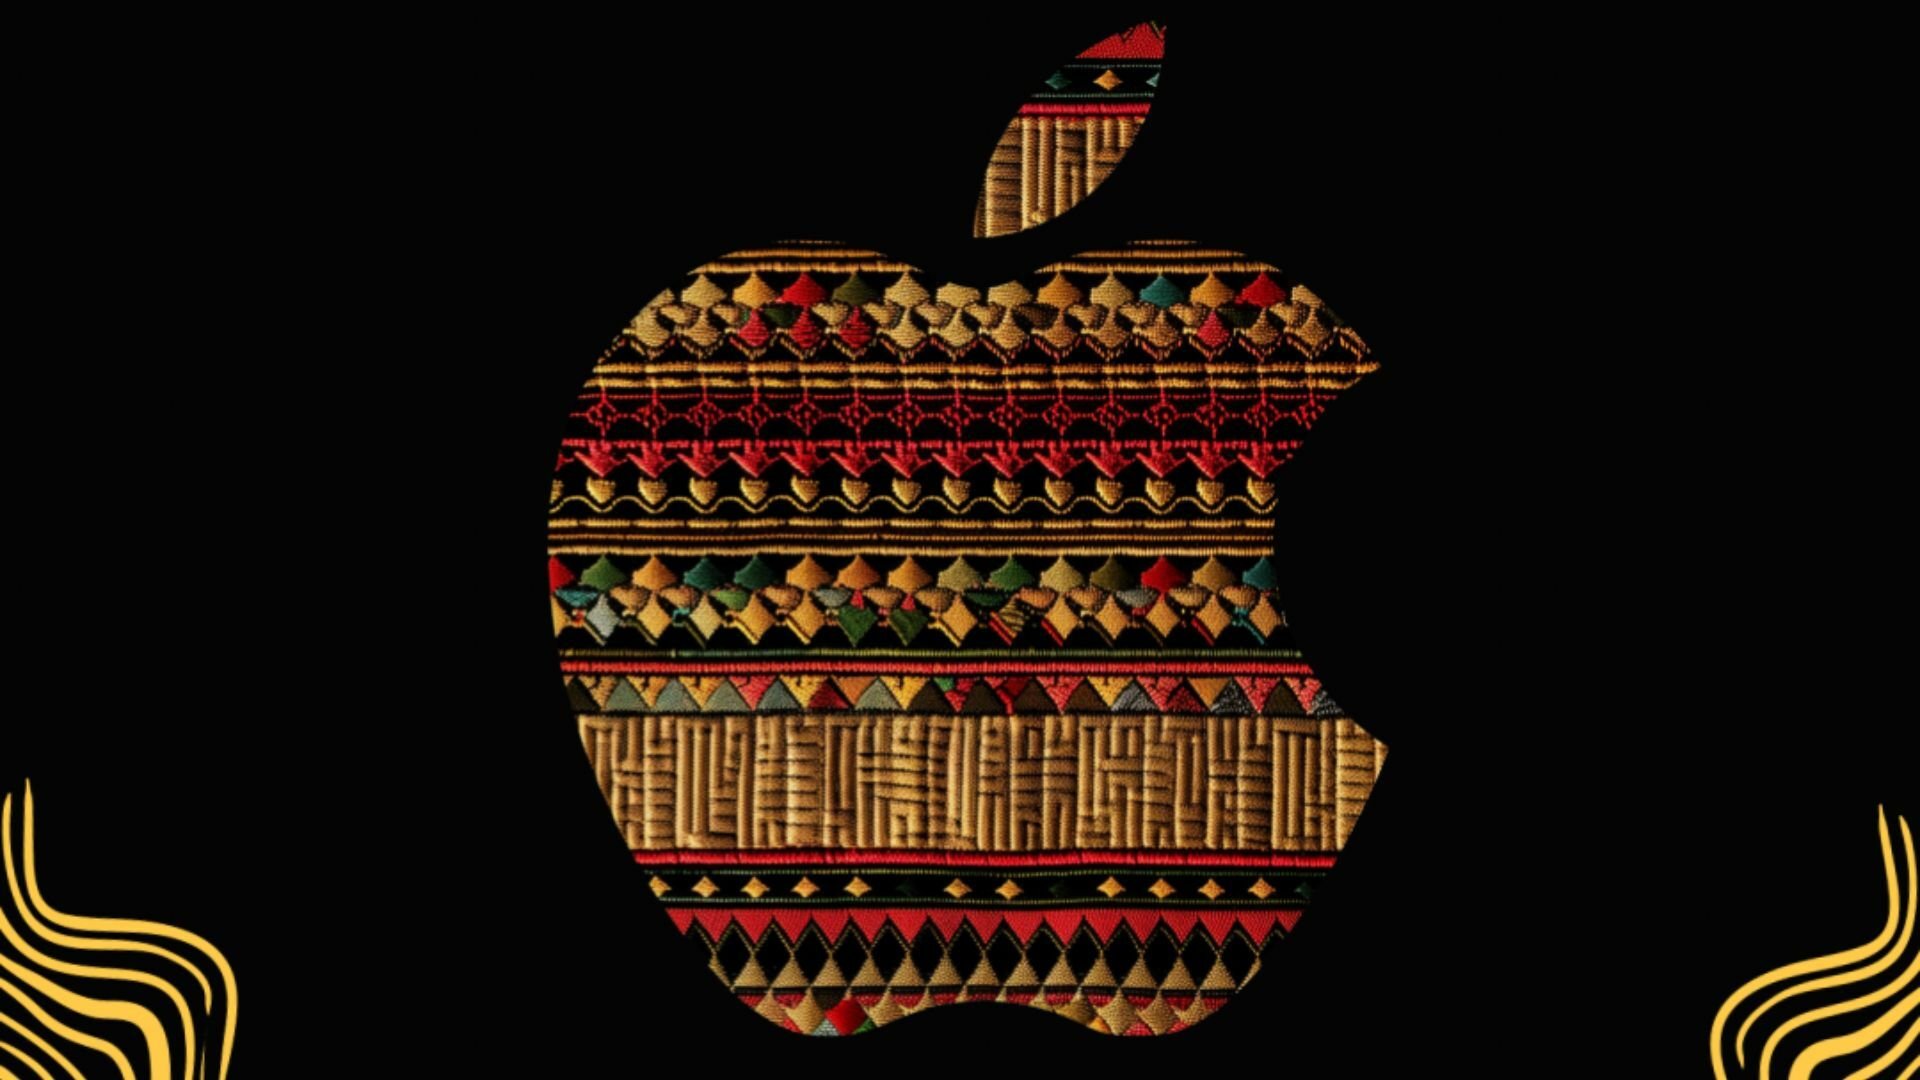 An Apple logo with a fabric pattern inside.